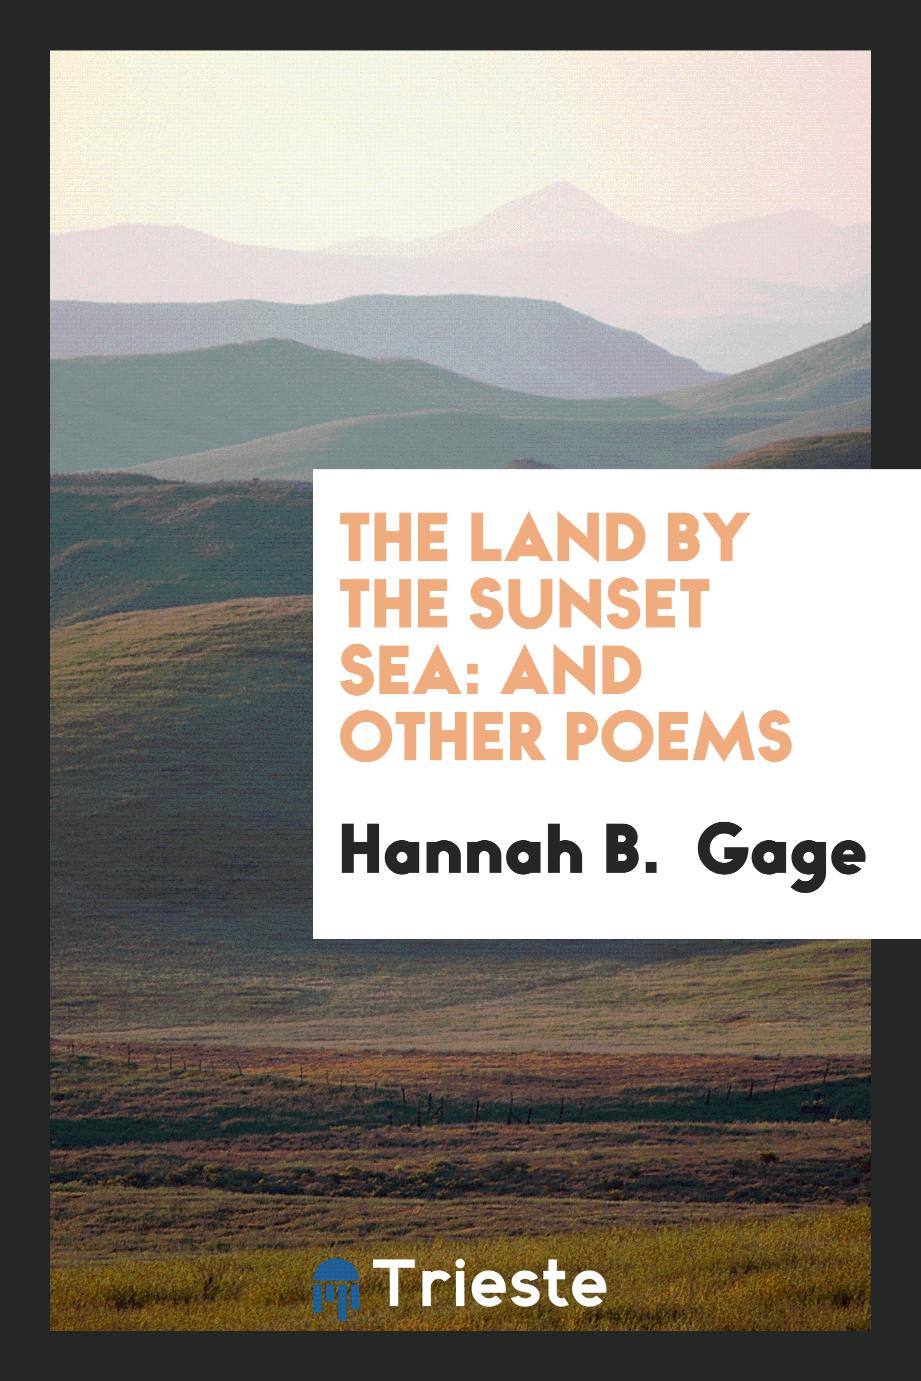 The Land by the Sunset Sea: And Other Poems